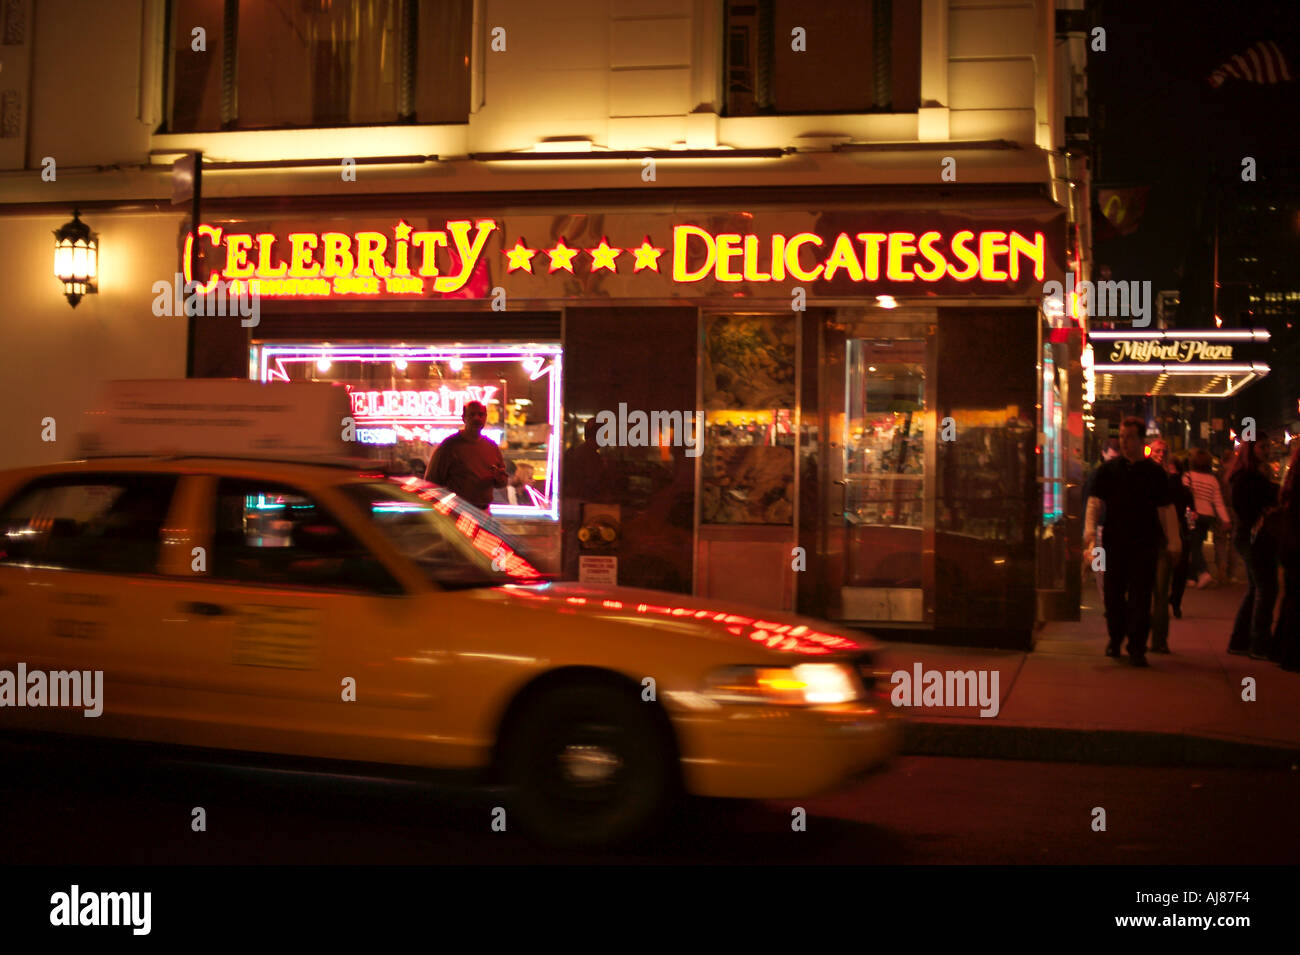 Celebrity Delicatessen on 8th Ave at 48th Street near Times Square in Midtown Manhattan New York NY Stock Photo